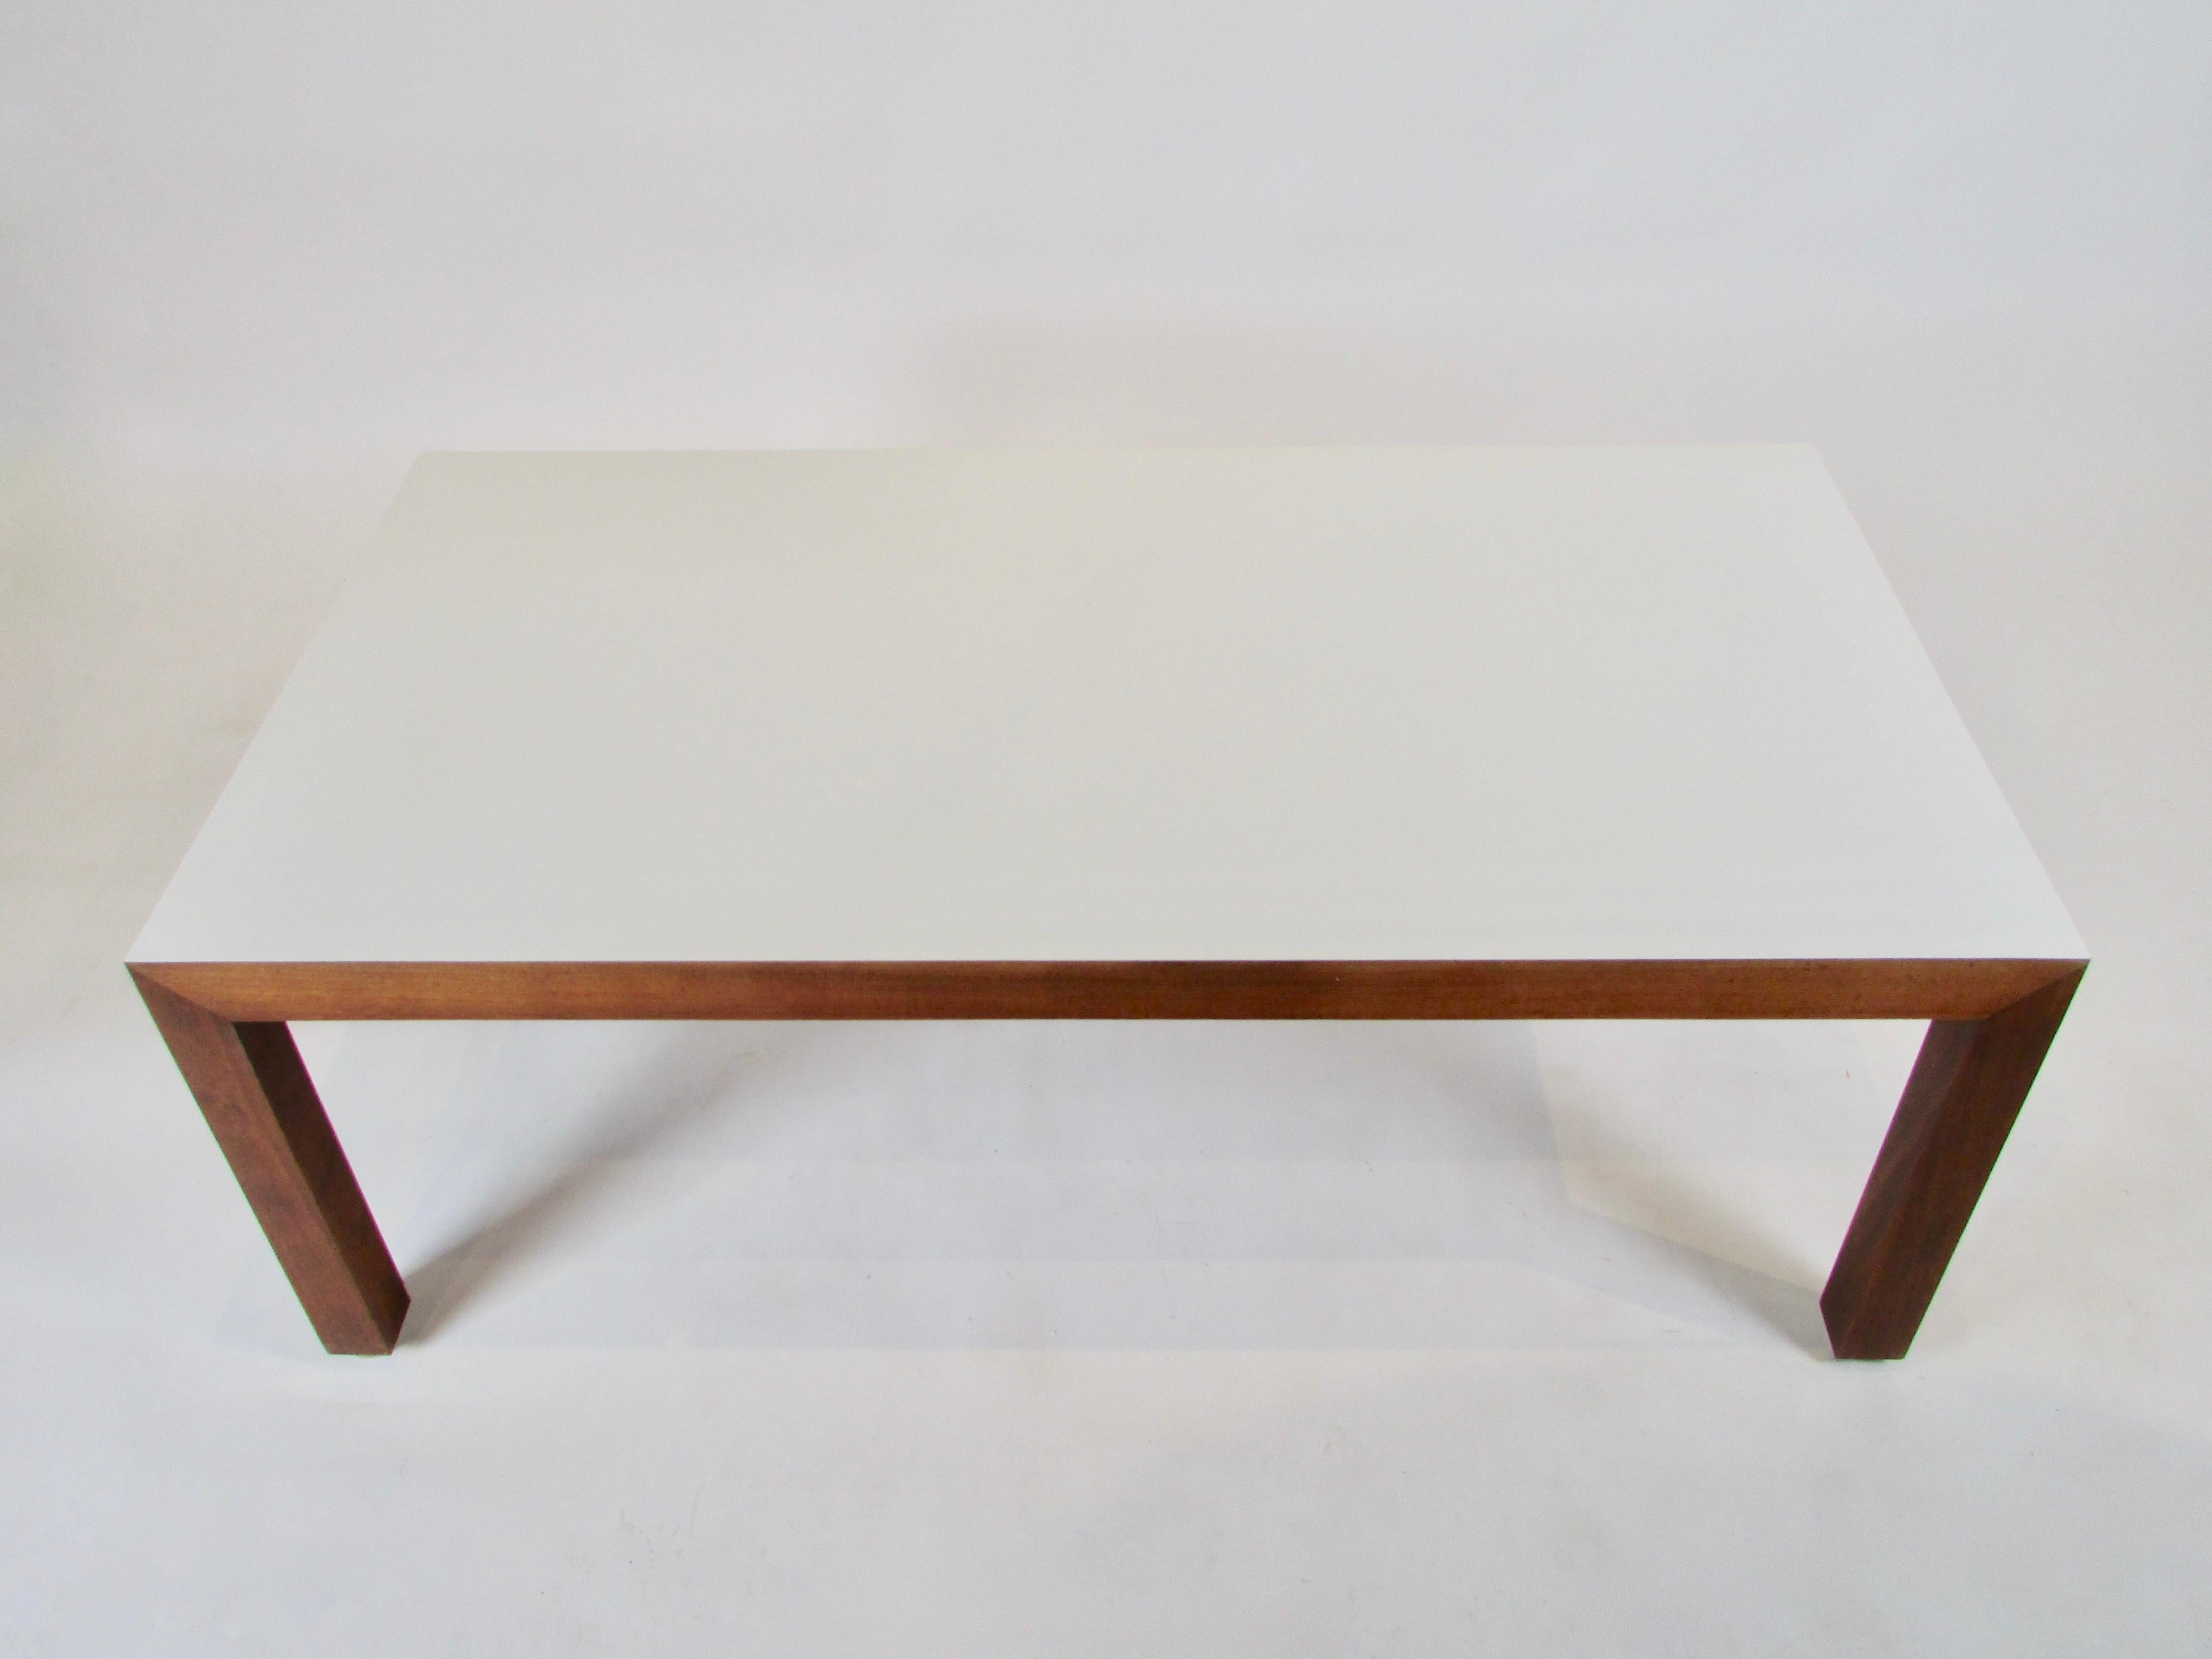 1960s Rectangular Wood Coffee Table with White Formica Laminate Top For Sale 2